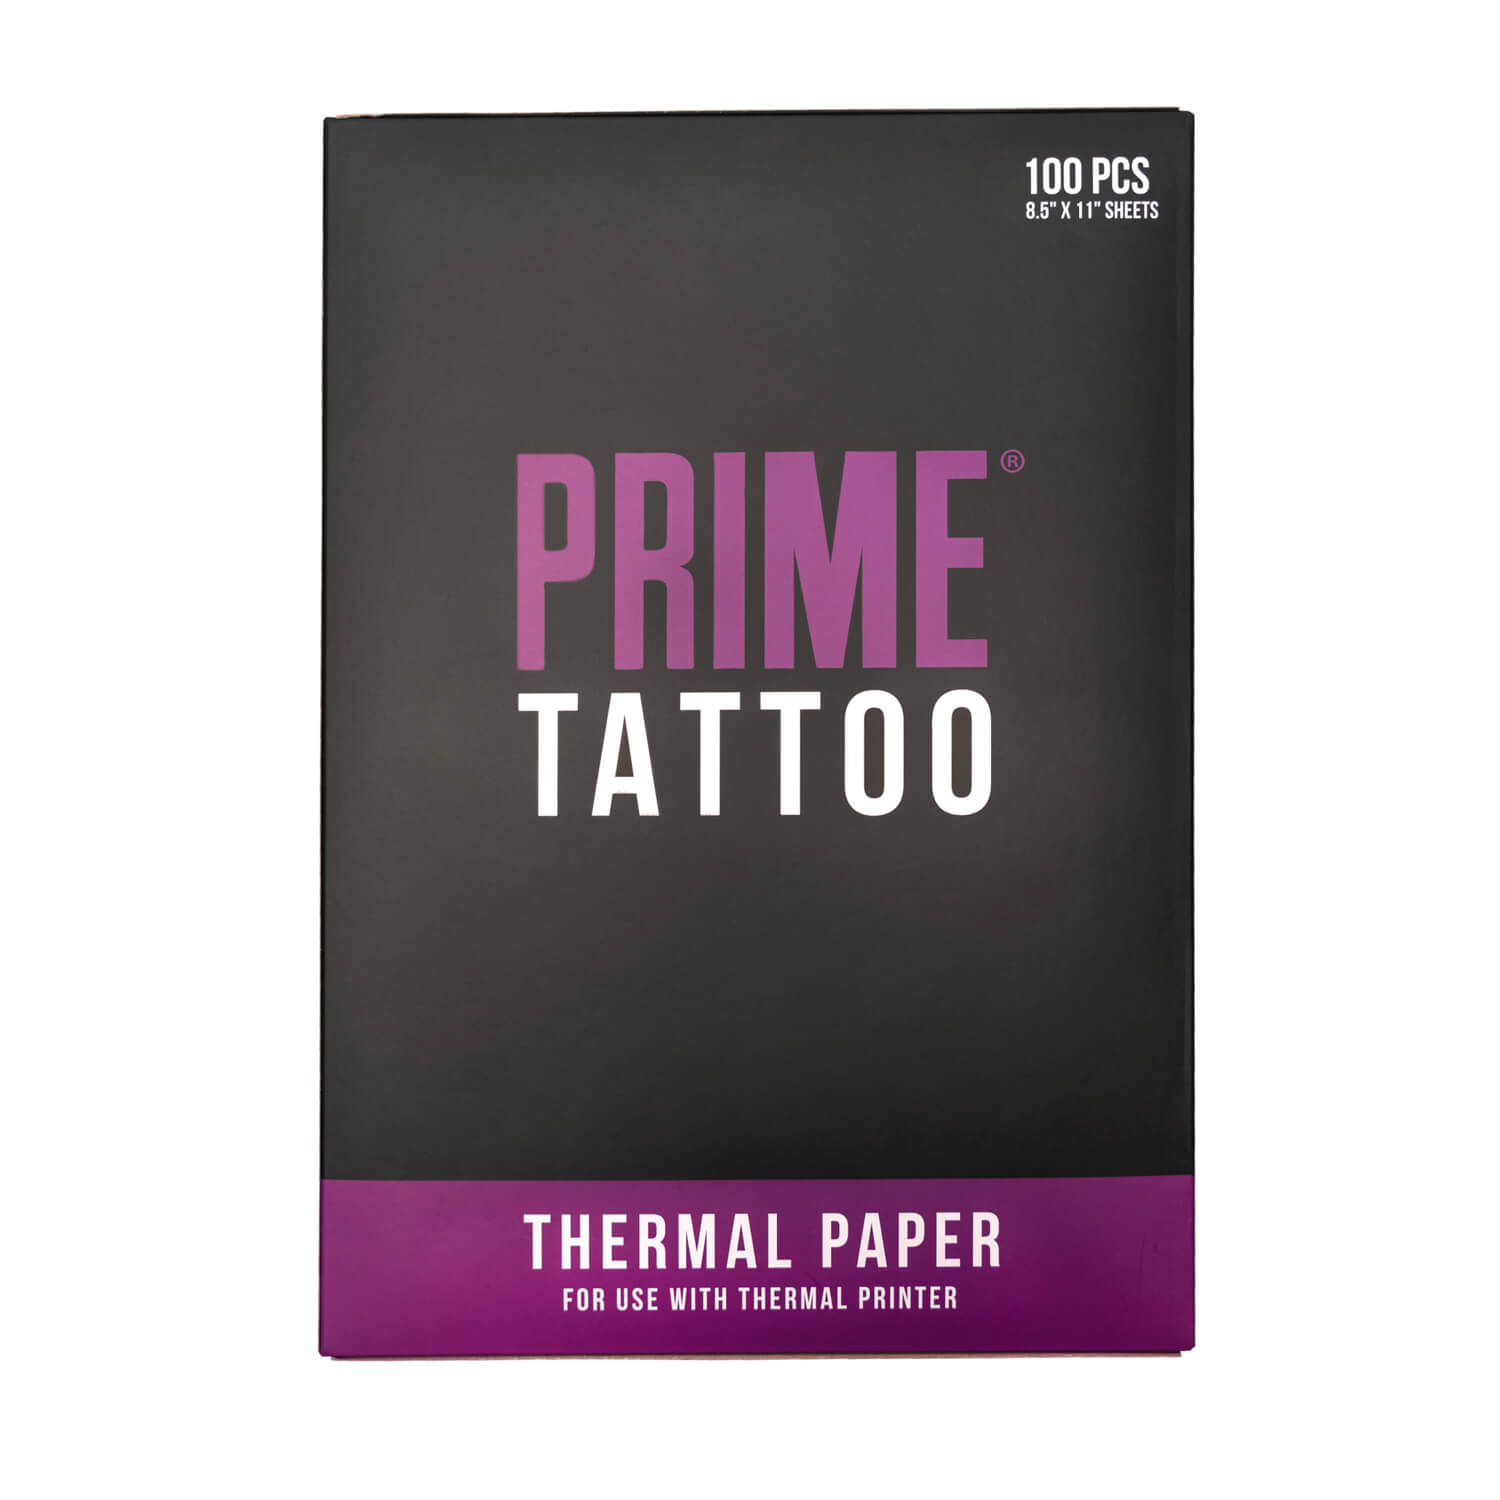 Try Tattoo Transfer Paper: A Beginners Guide – HTVRONT